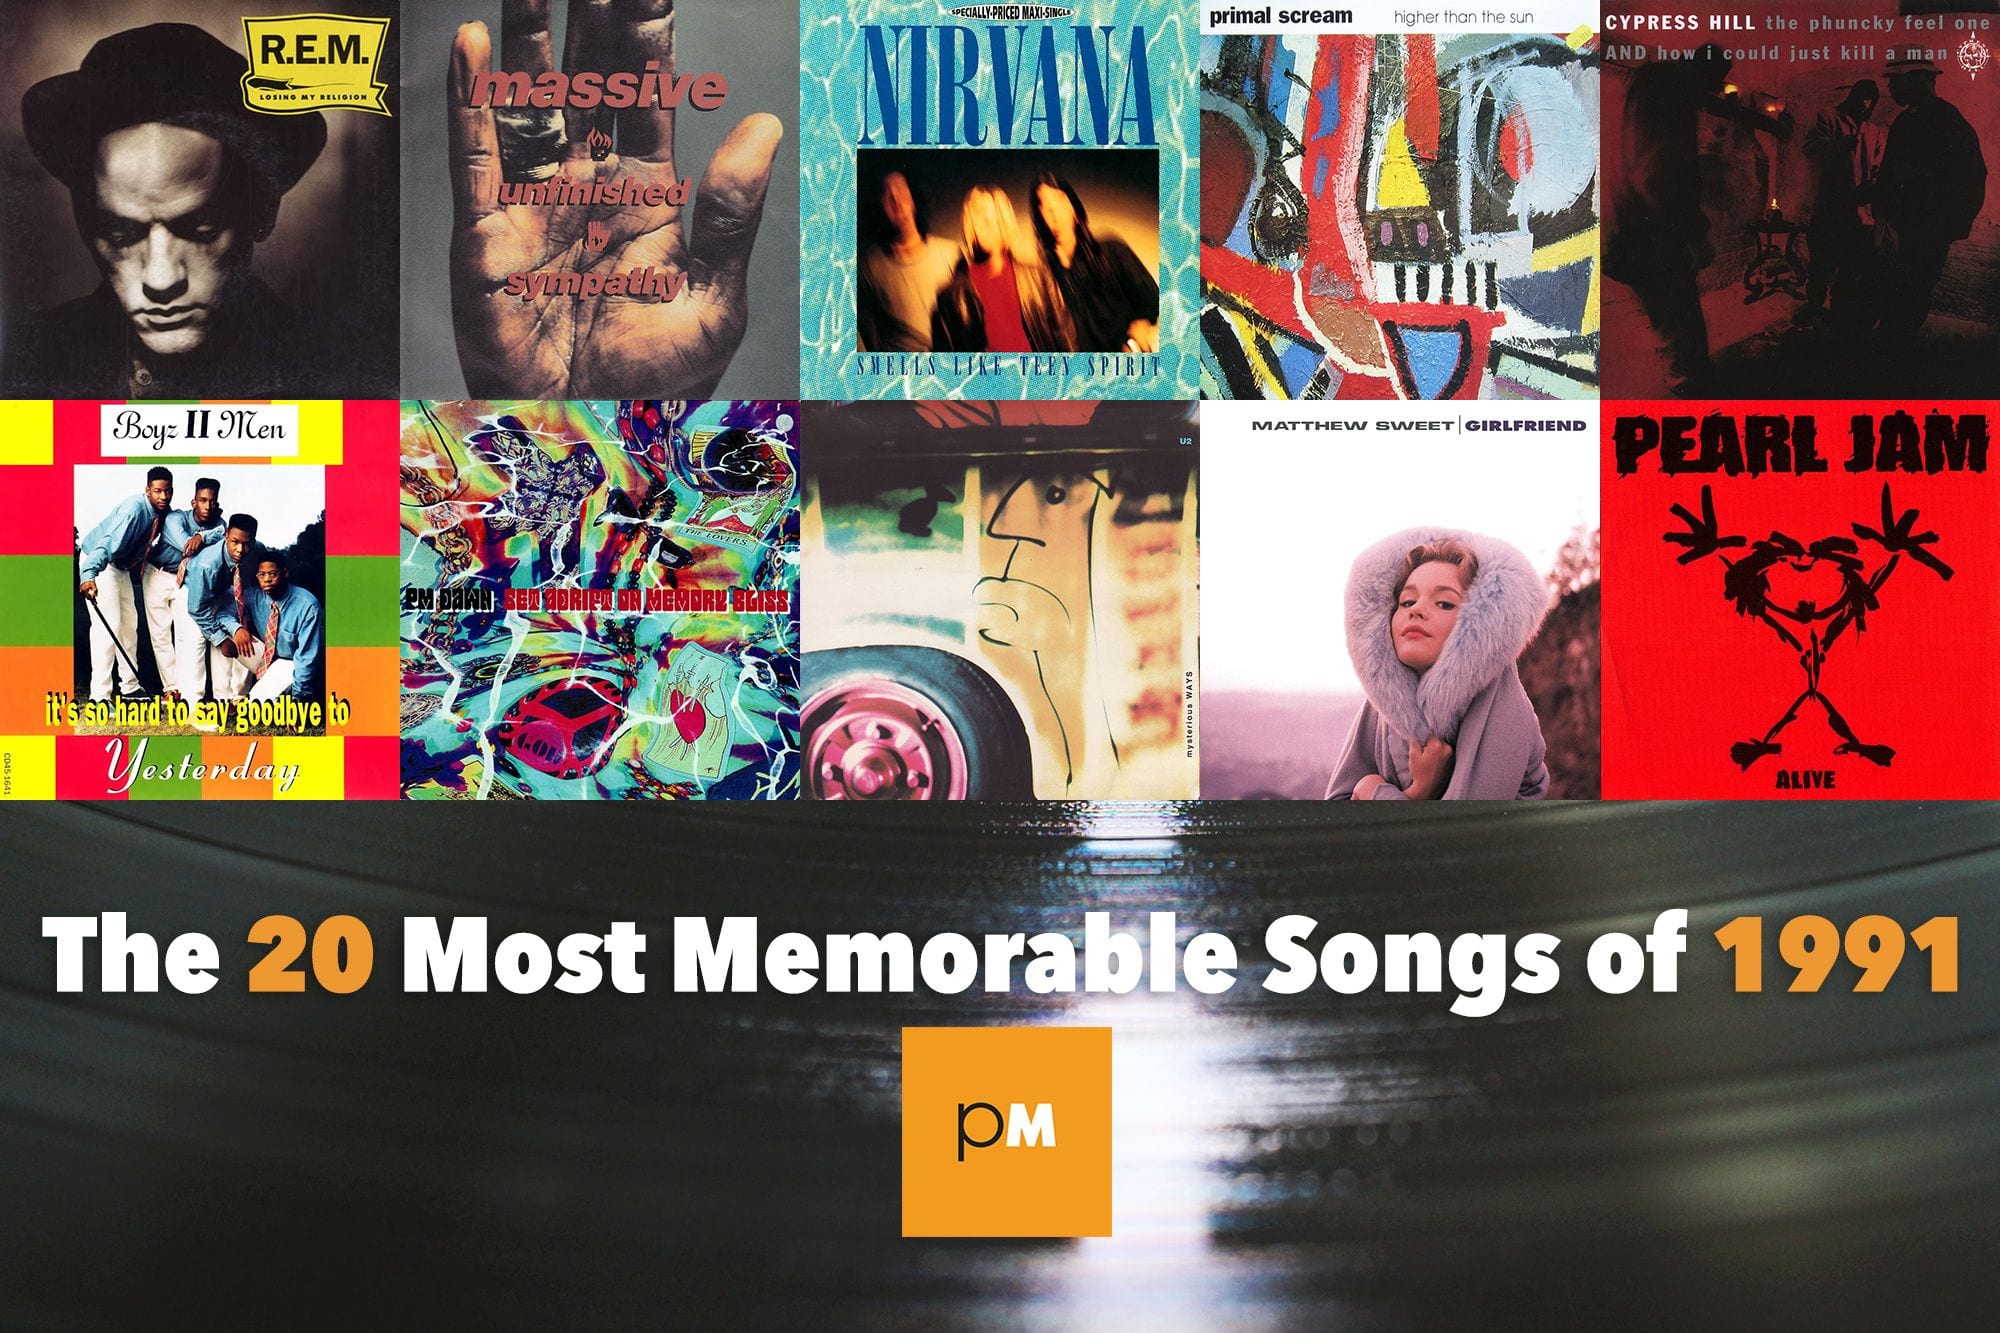 The 20 Most Memorable Songs of 1991